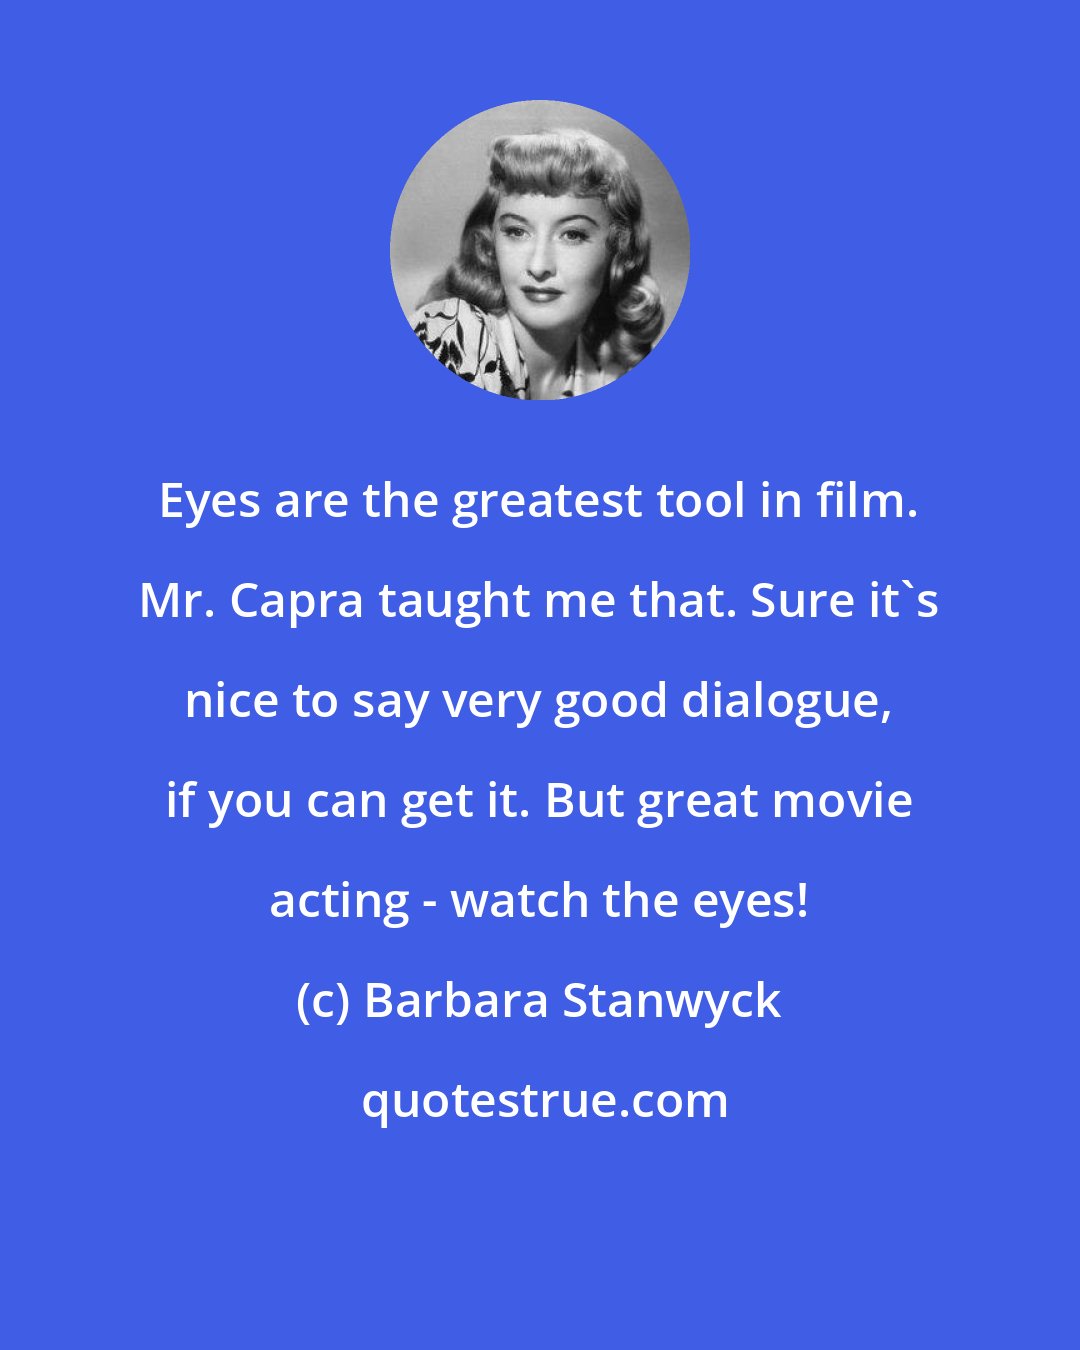 Barbara Stanwyck: Eyes are the greatest tool in film. Mr. Capra taught me that. Sure it's nice to say very good dialogue, if you can get it. But great movie acting - watch the eyes!